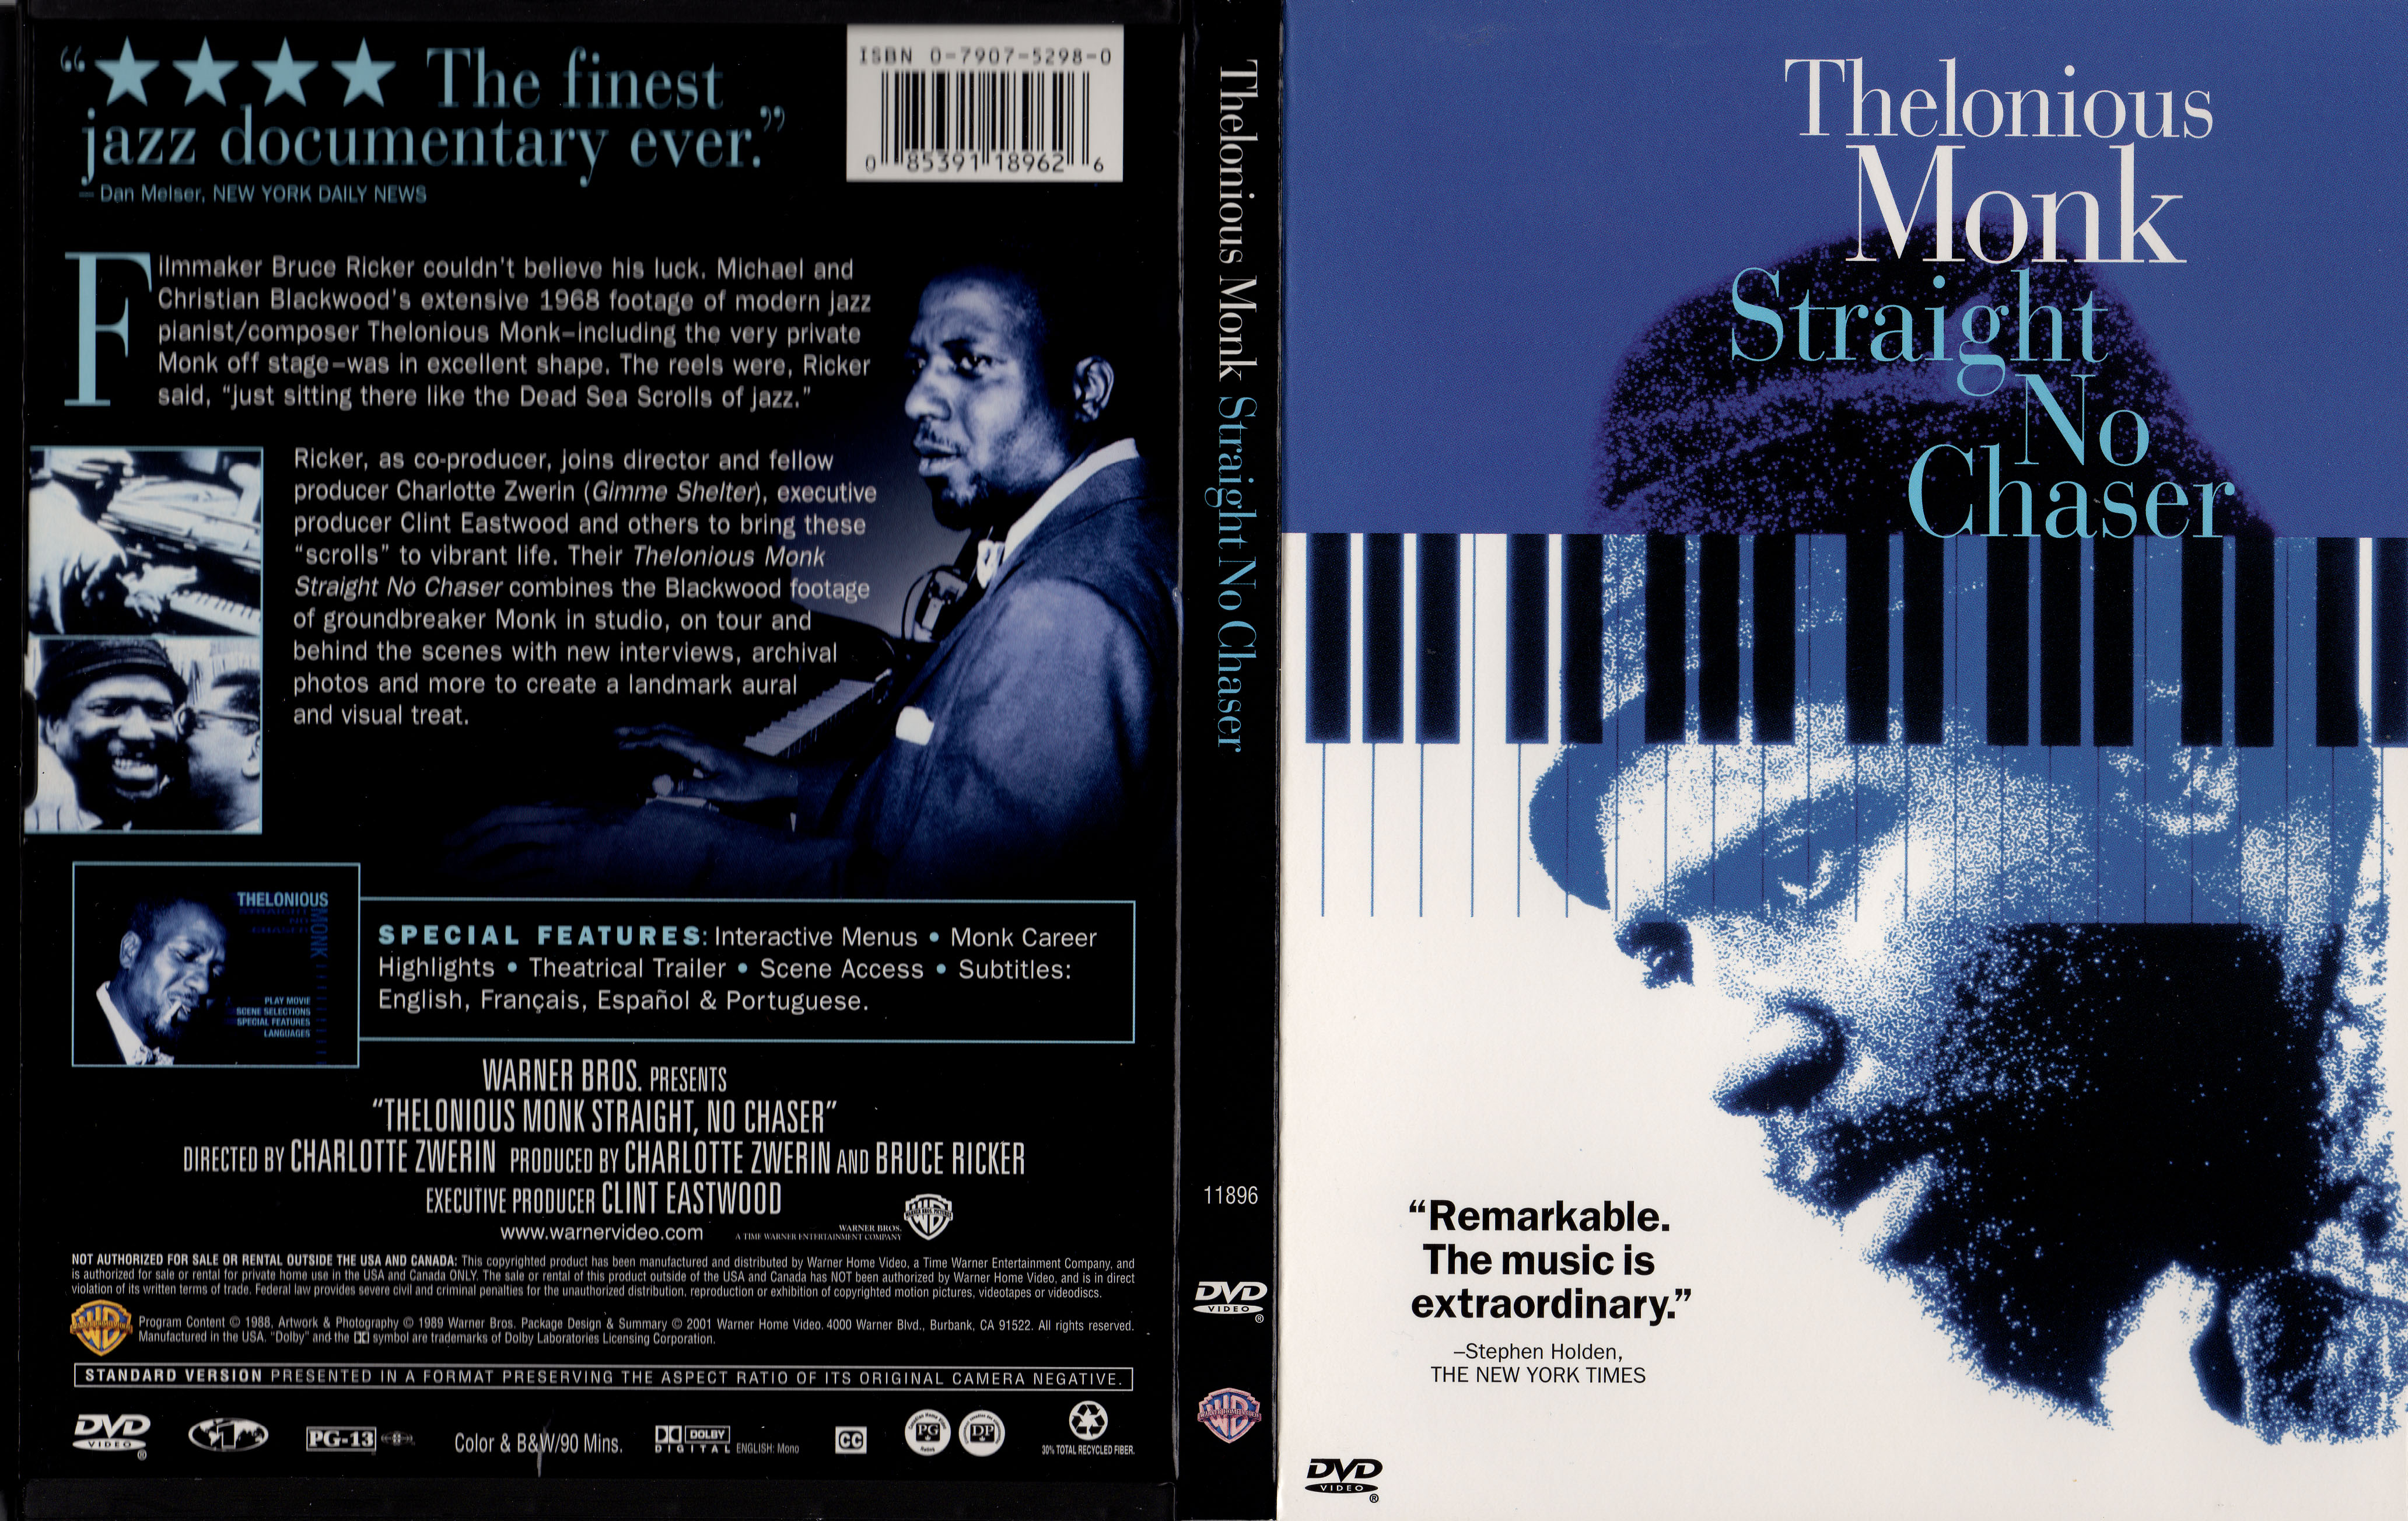 Jaquette DVD Thelonious Monk straight no chaser